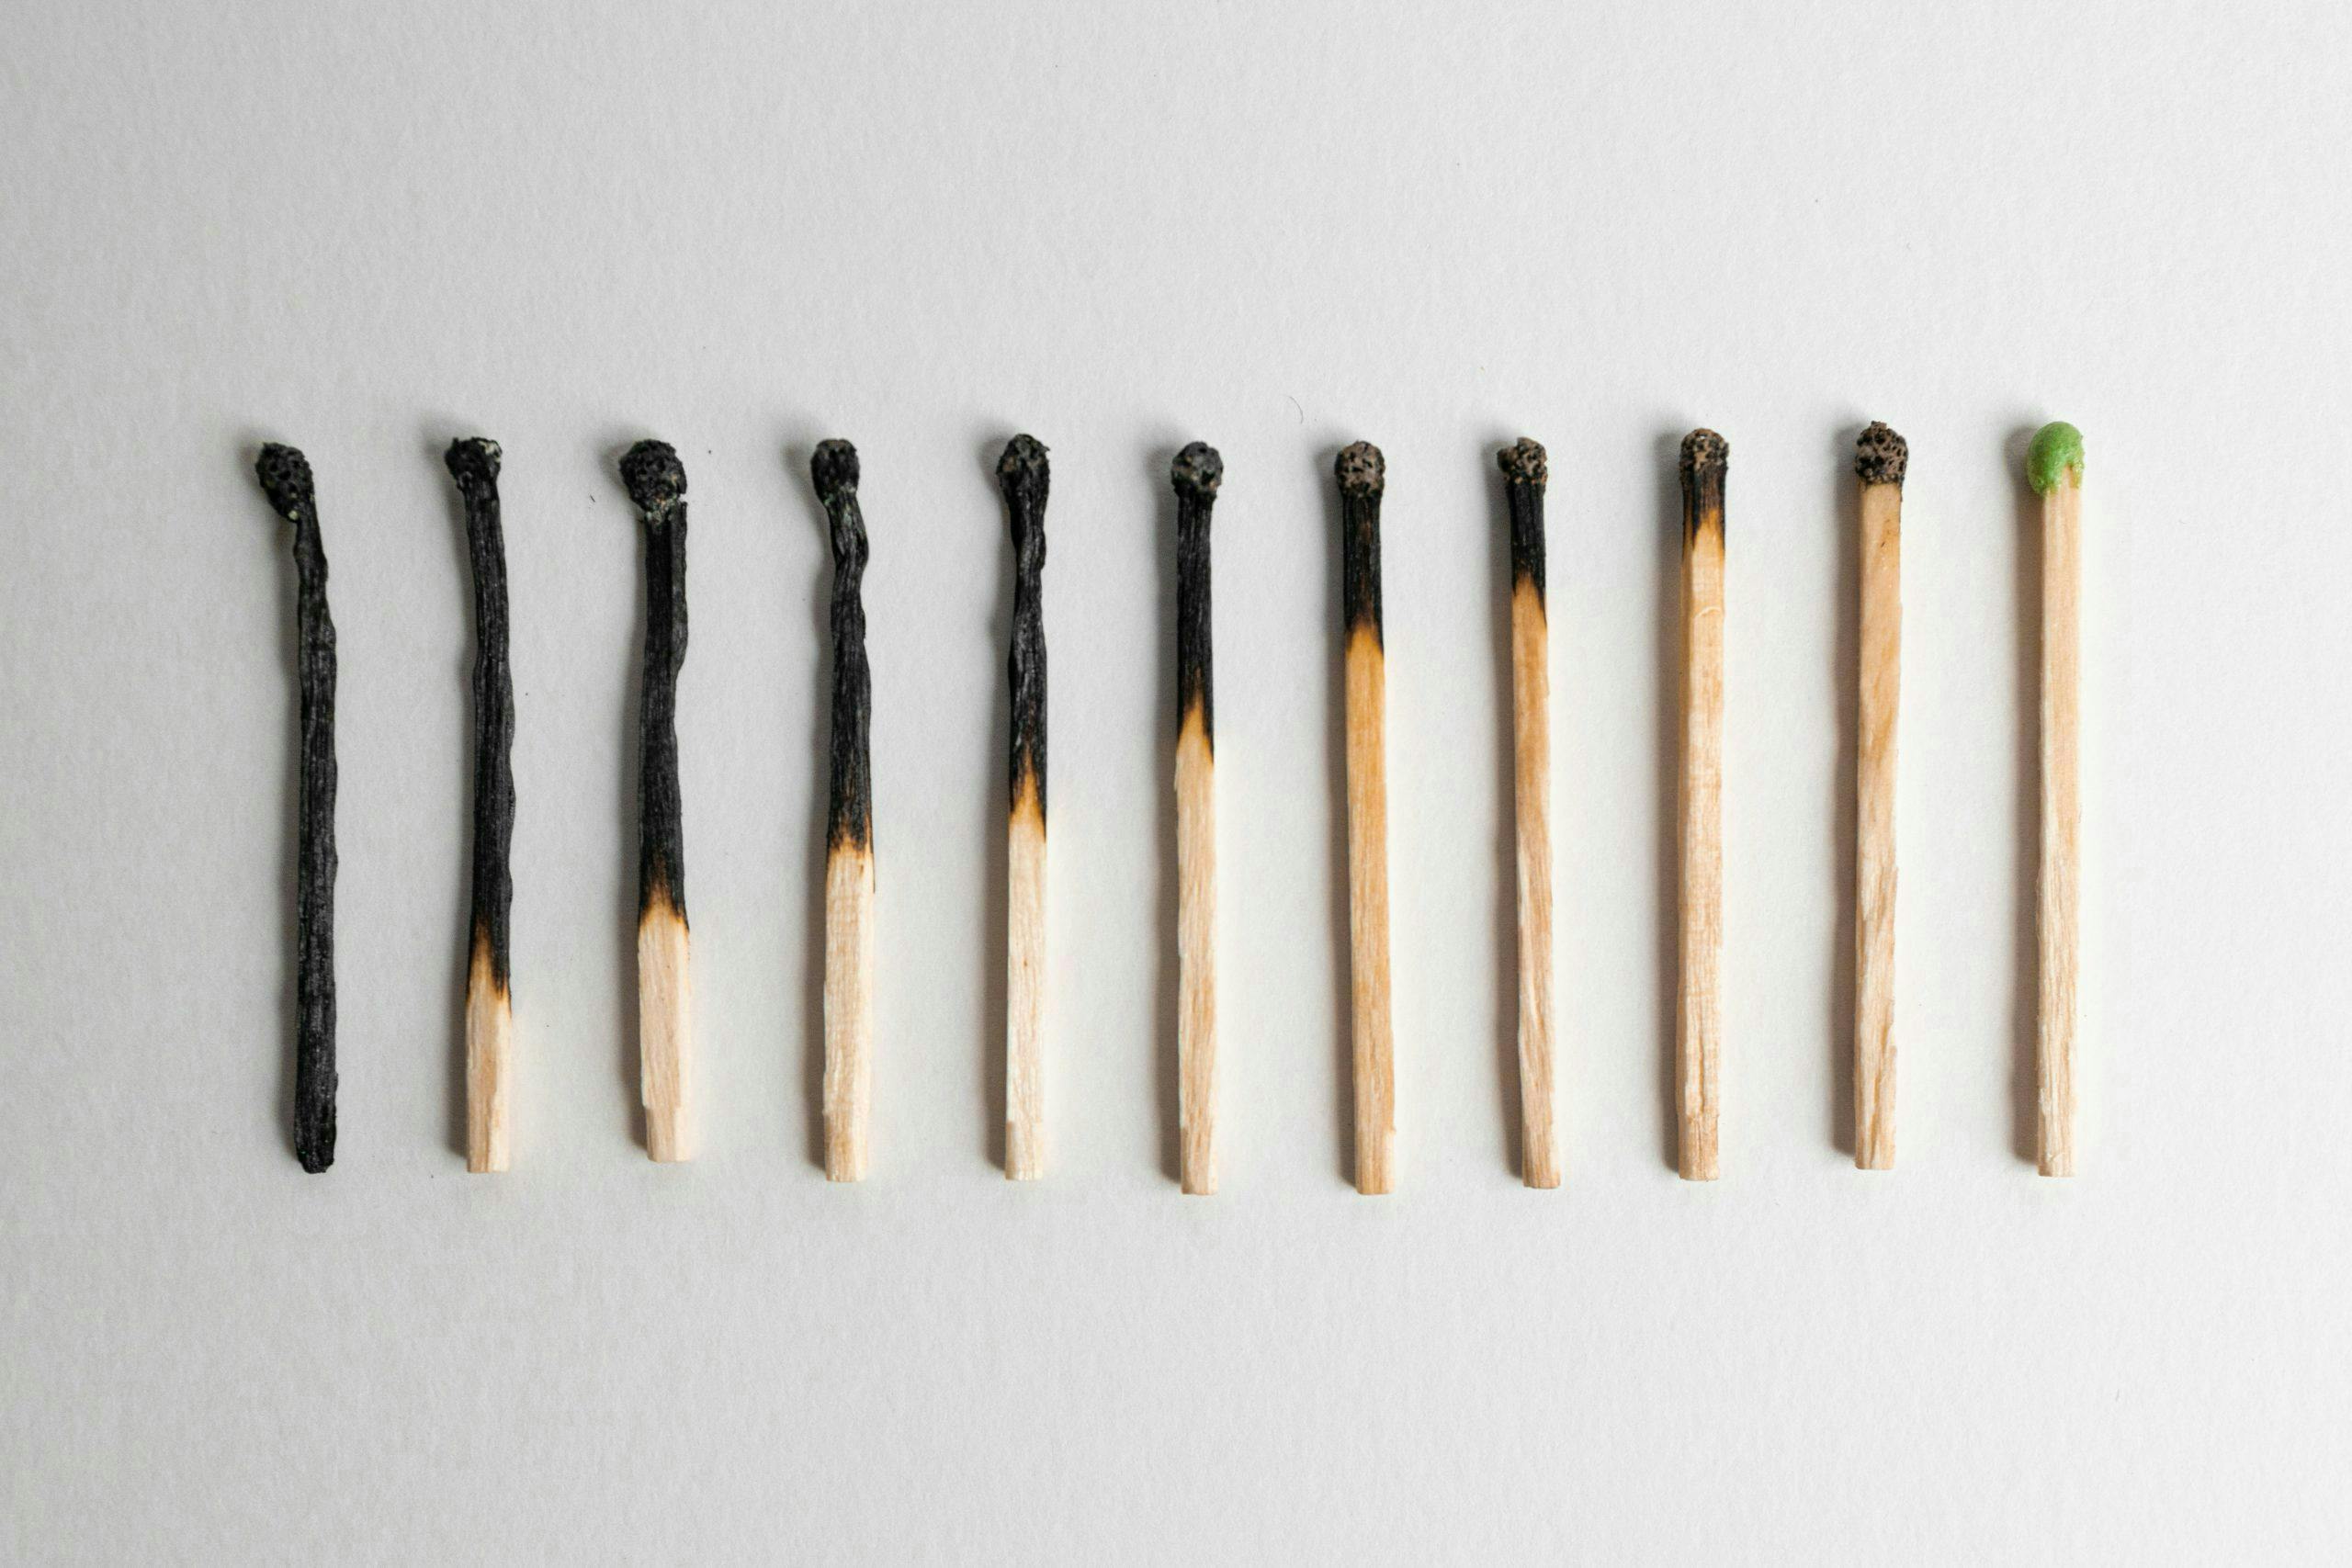 Eleven matches arranged sequentially; ten are burned to varying degrees, and one is unlit with a green tip. They are positioned horizontally on a light grey surface.